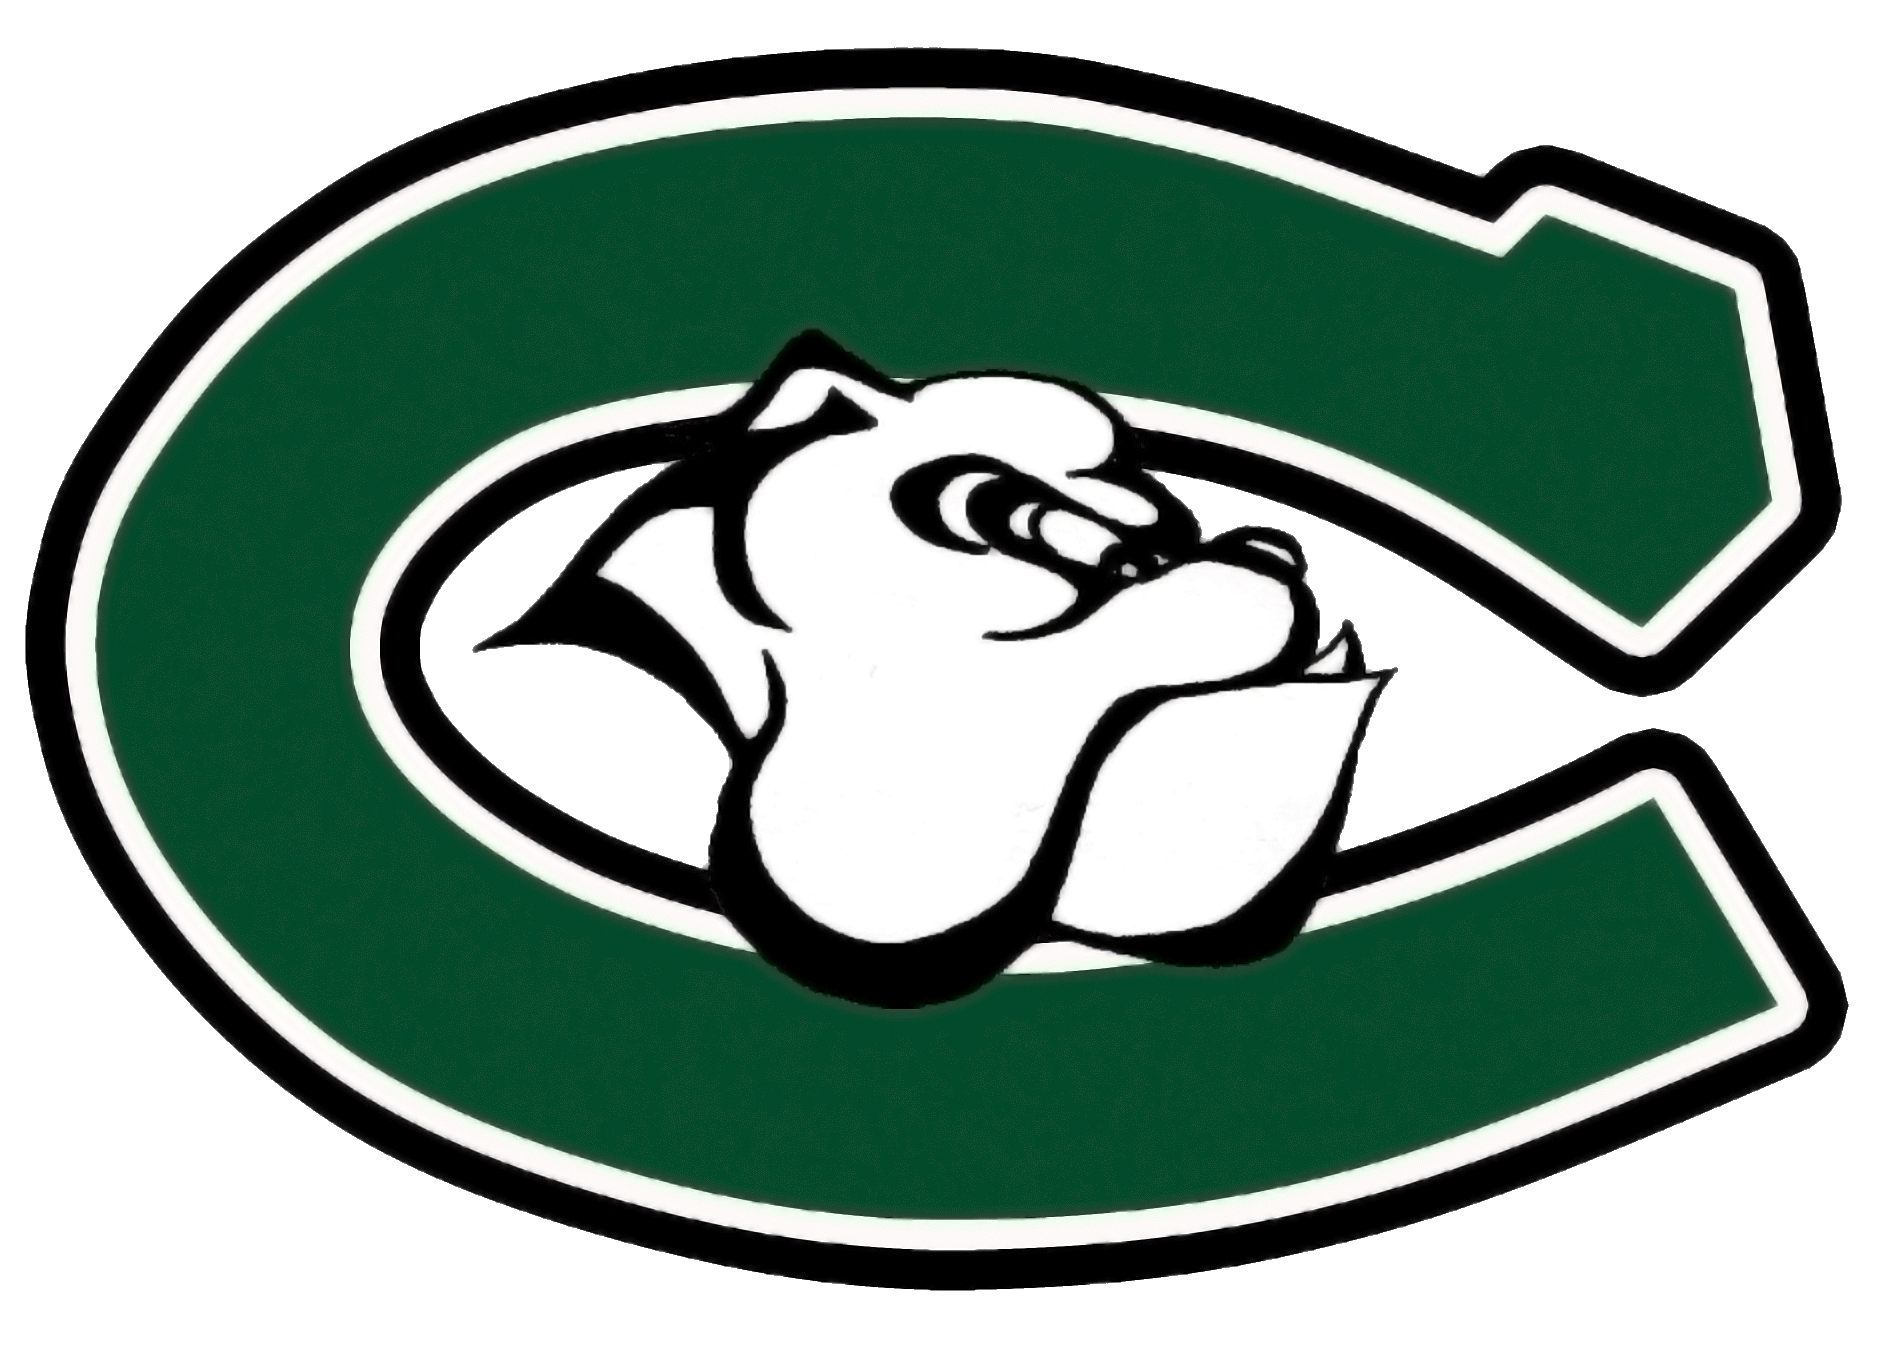 High School Bulldog Logo - If you're good enough, we will find you